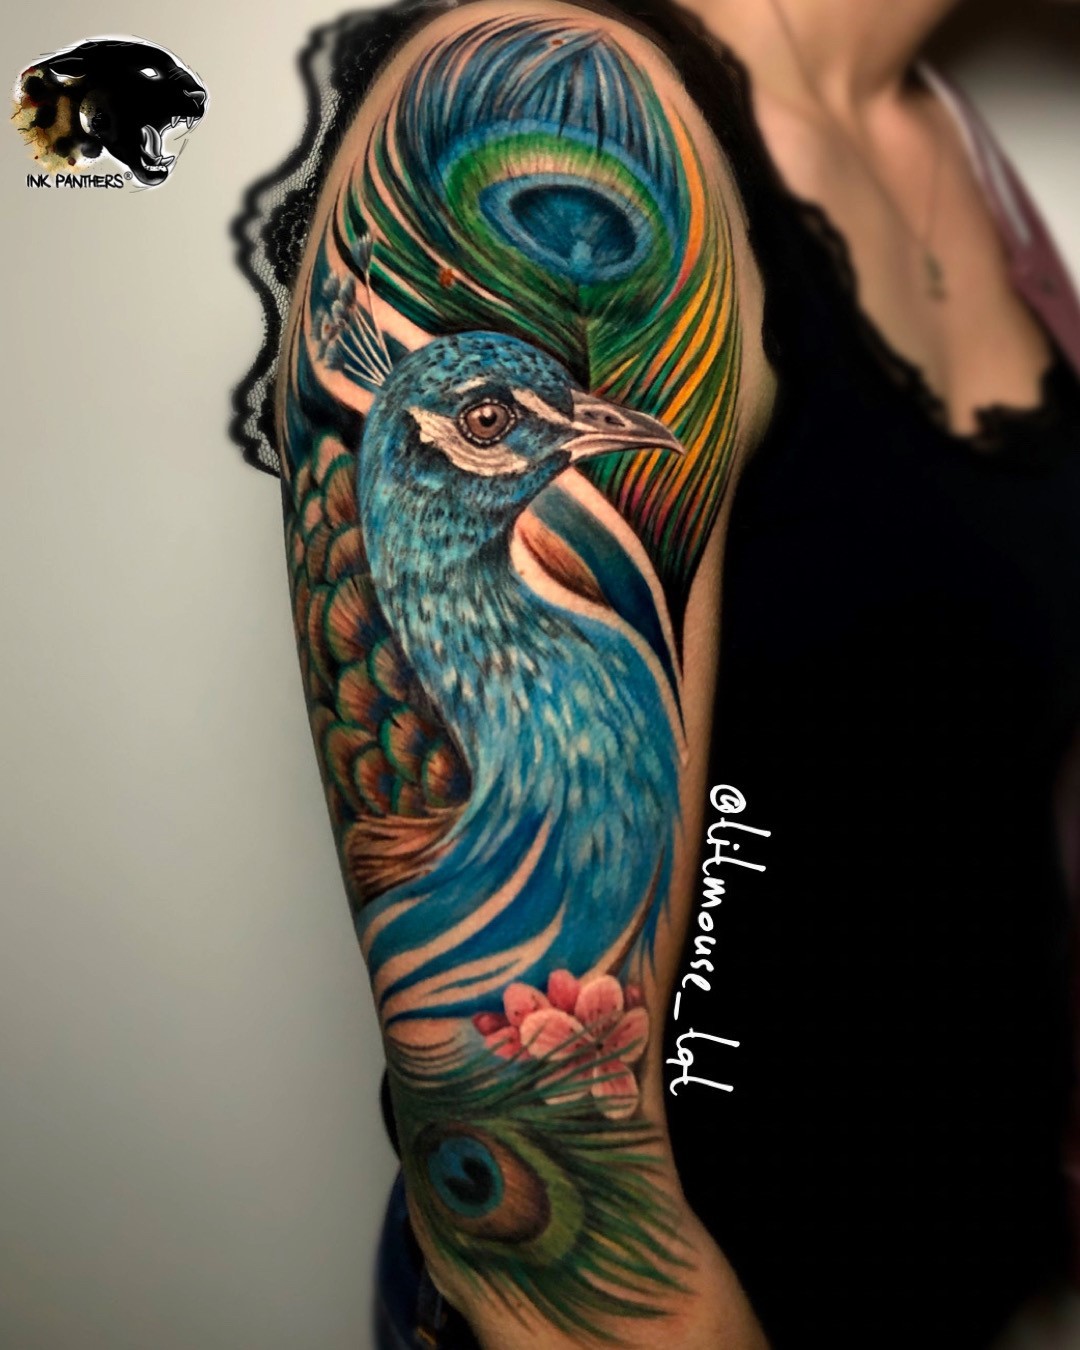 Peacock tattoo on upper arm by inkpanthers